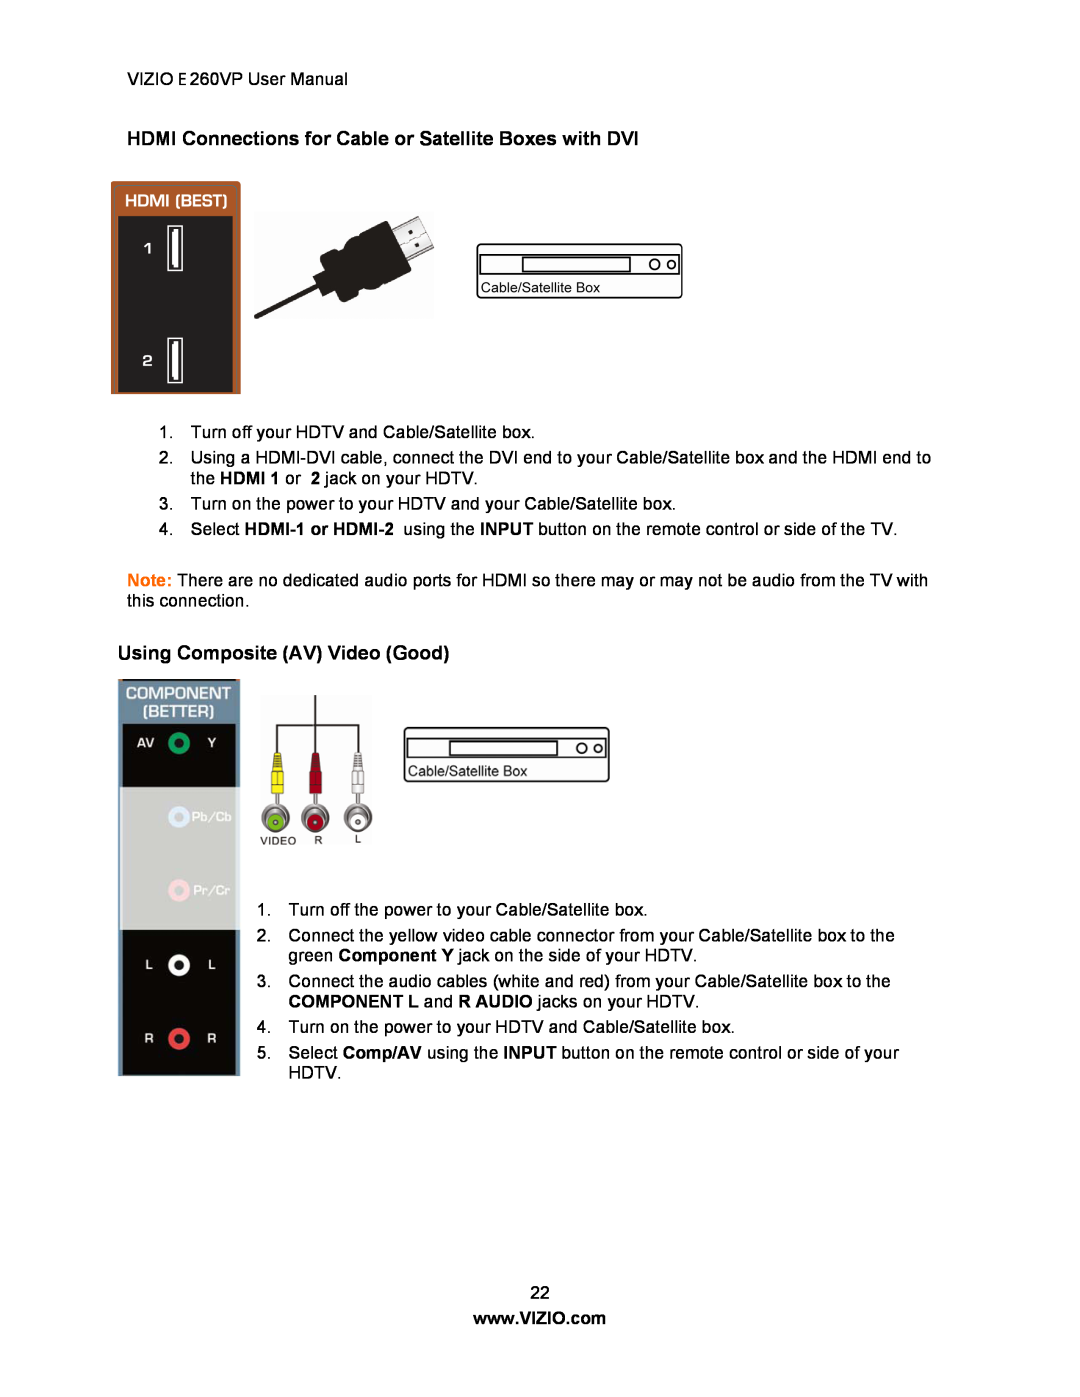 Vizio E260VP user manual HDMI Connections for Cable or Satellite Boxes with DVI, Using Composite AV Video Good 